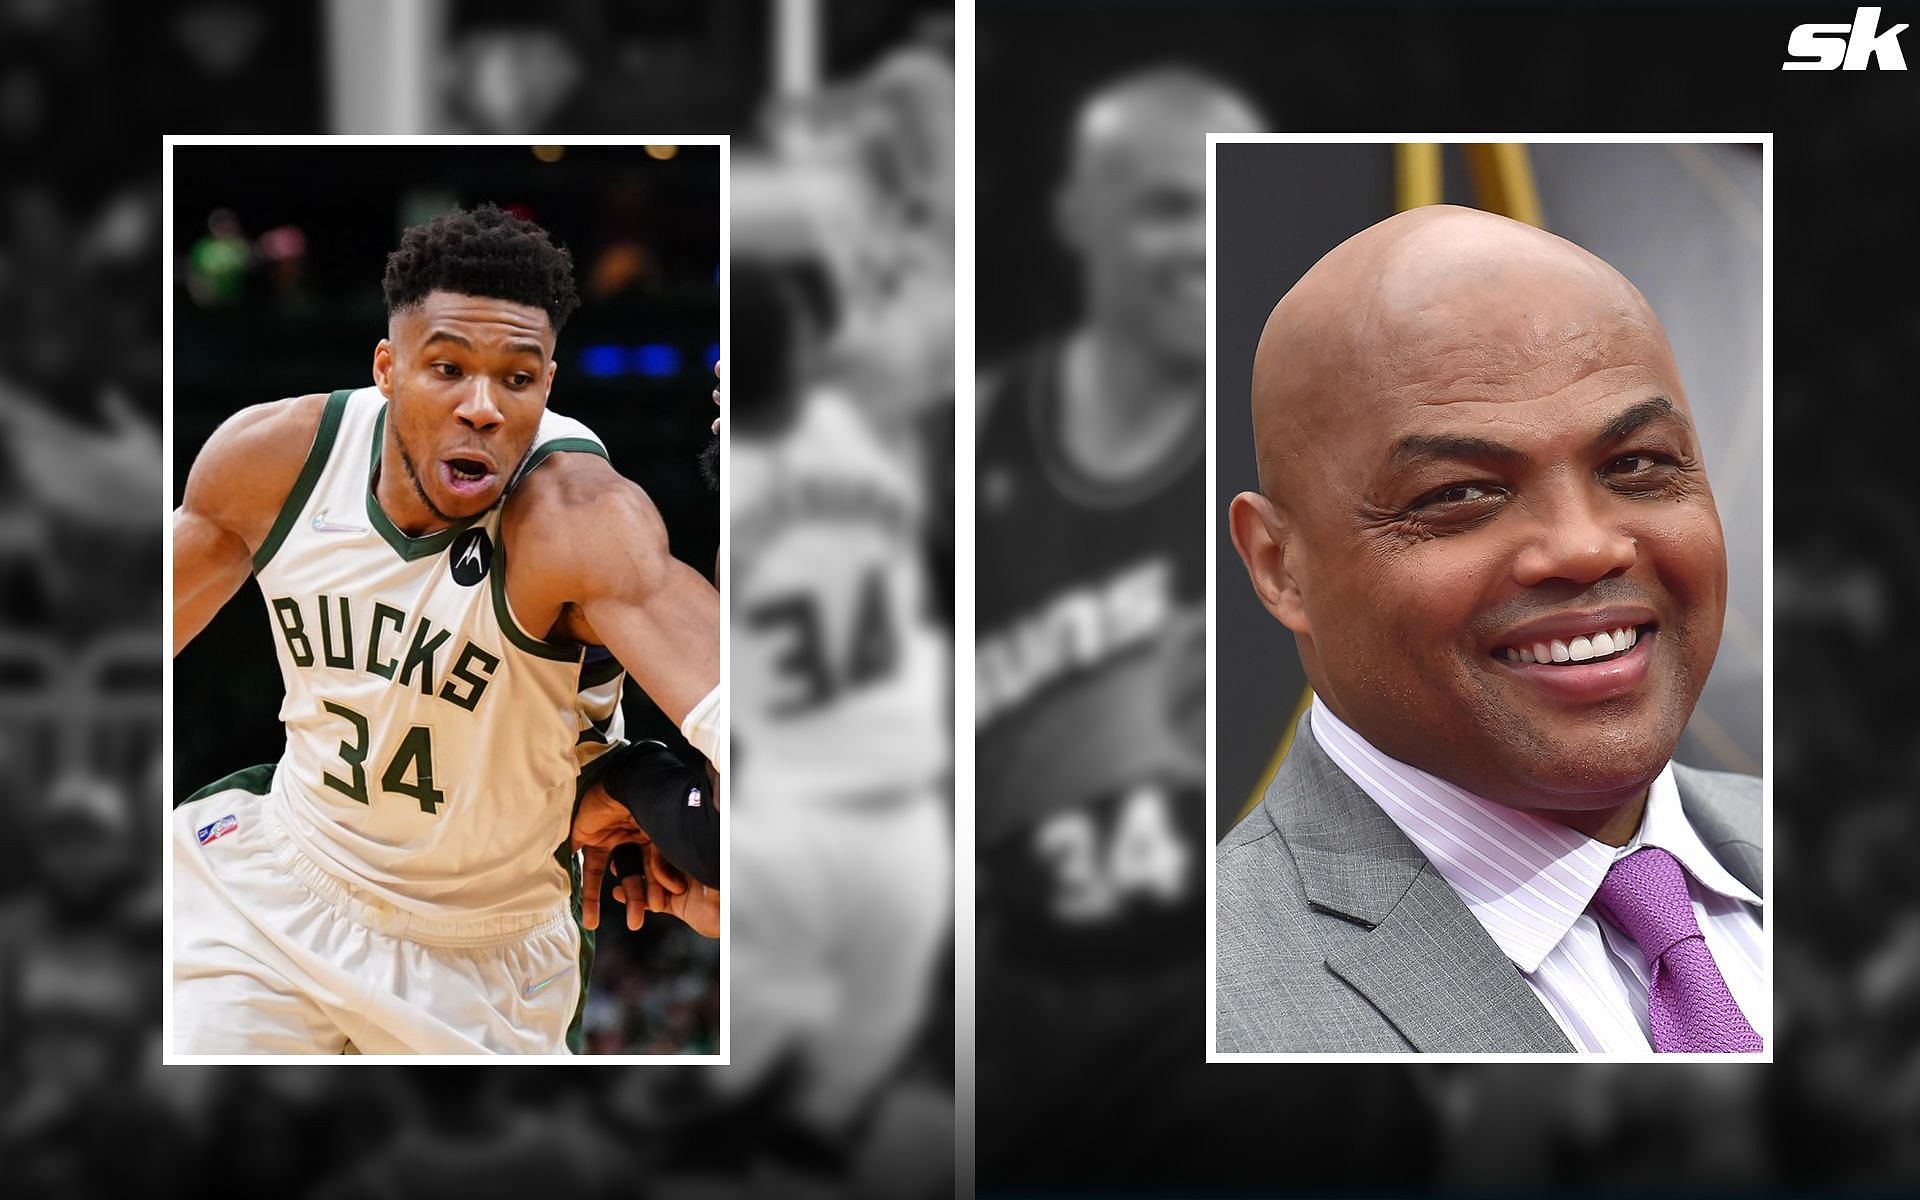 Who would you pick as your power forward? Charles Barkley or Giannis Antetokounmpo?